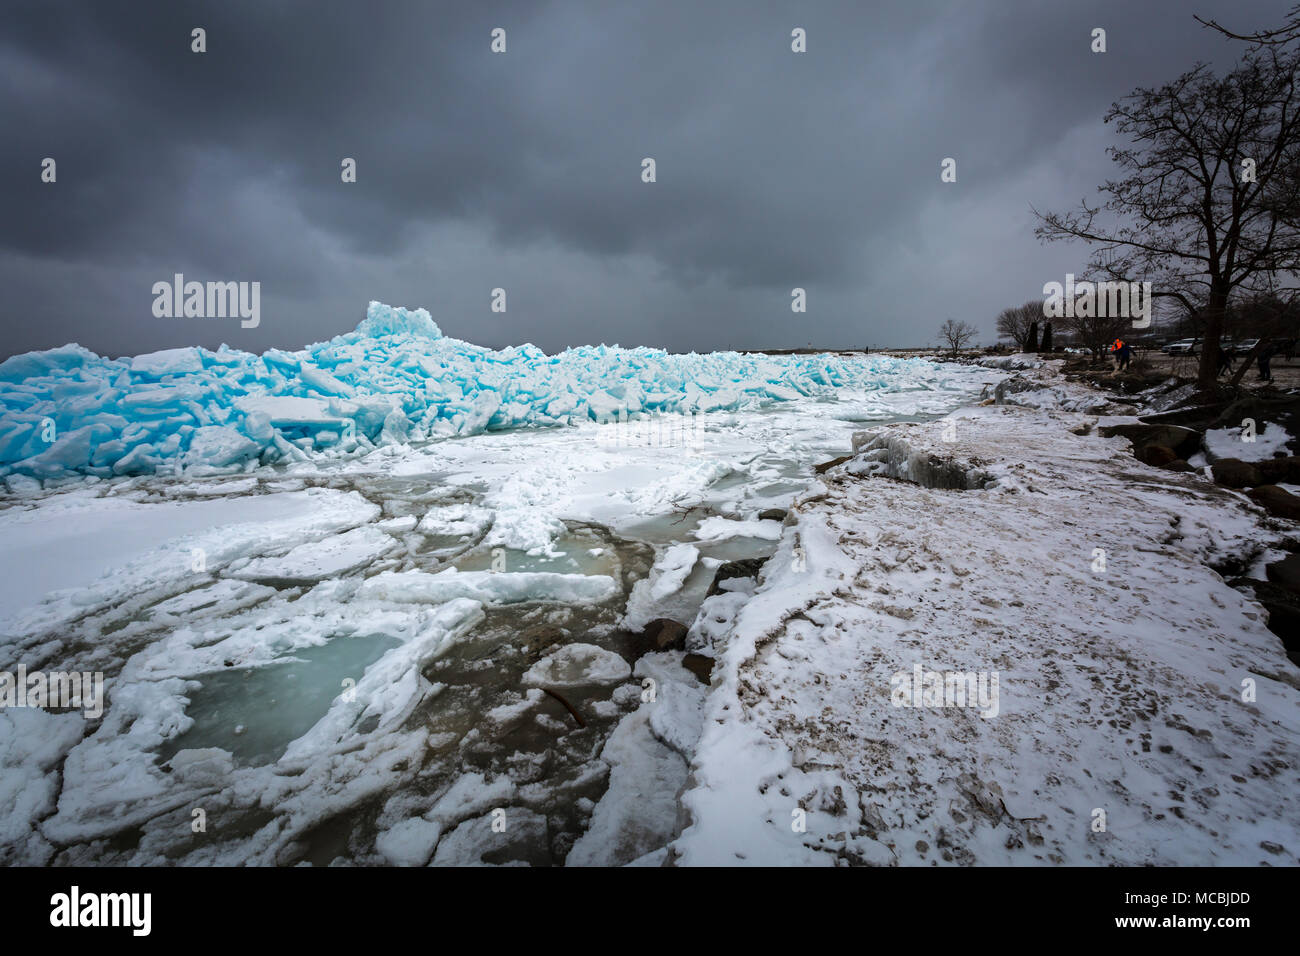 Blue Ice, Meaford, Georgian Bay, Ontario, Canada, six meters high, Blue Ice occurs when snow falls, is compressed, air bubbles are squeezed out and ic Stock Photo